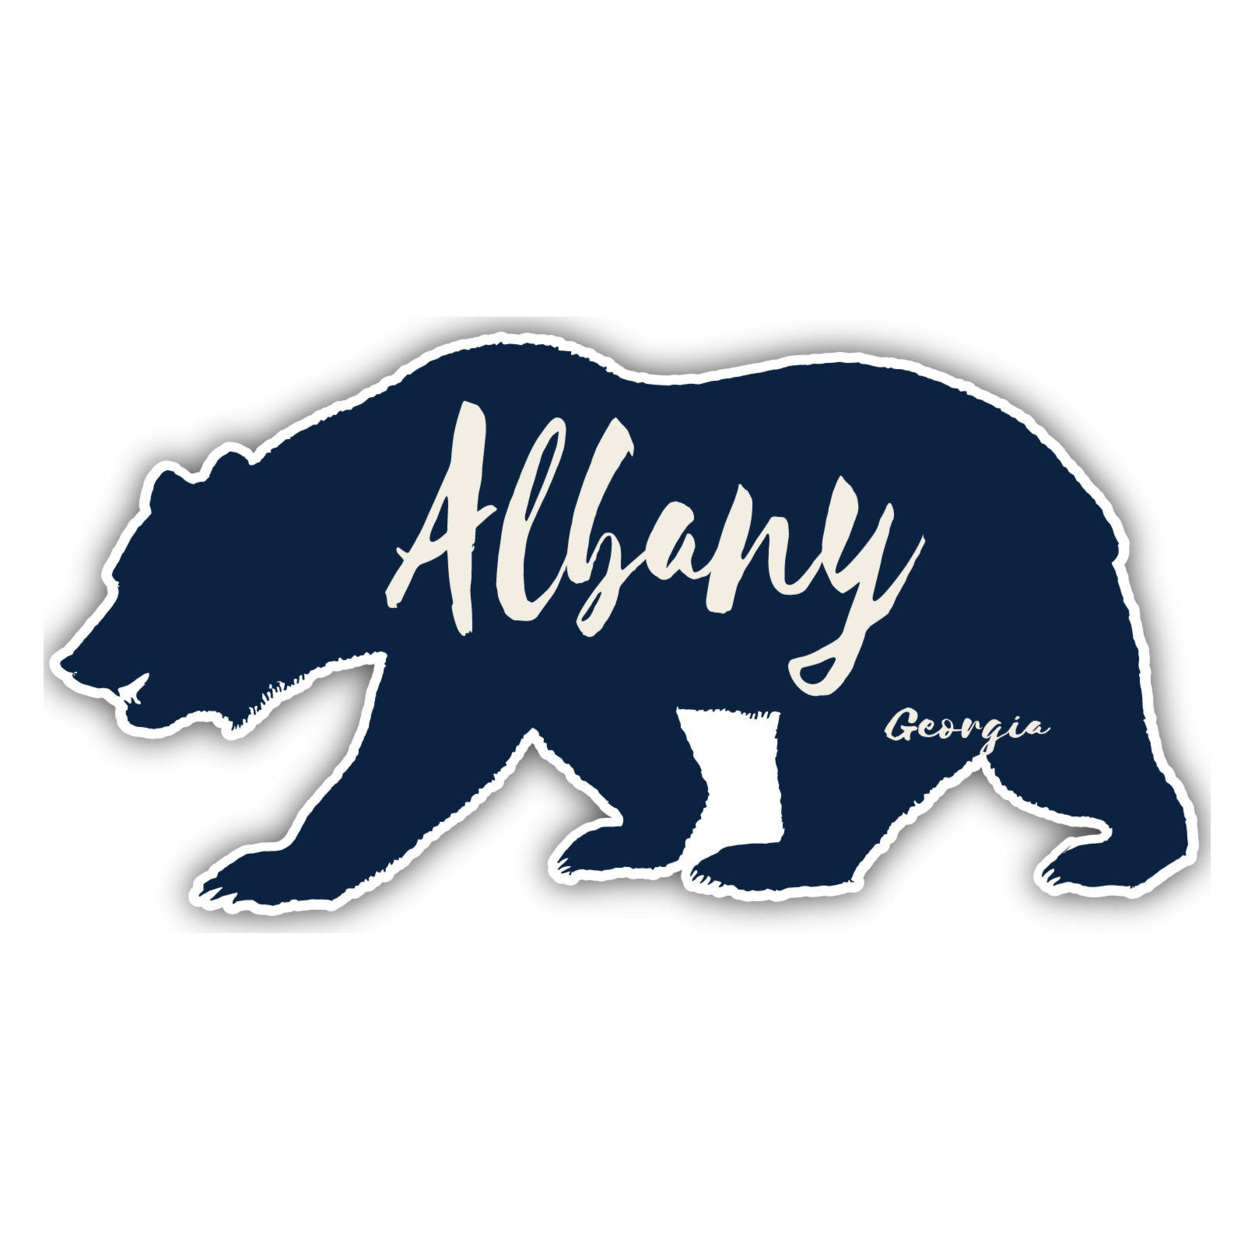 Albany Georgia Souvenir Decorative Stickers (Choose Theme And Size) - 4-Pack, 12-Inch, Bear